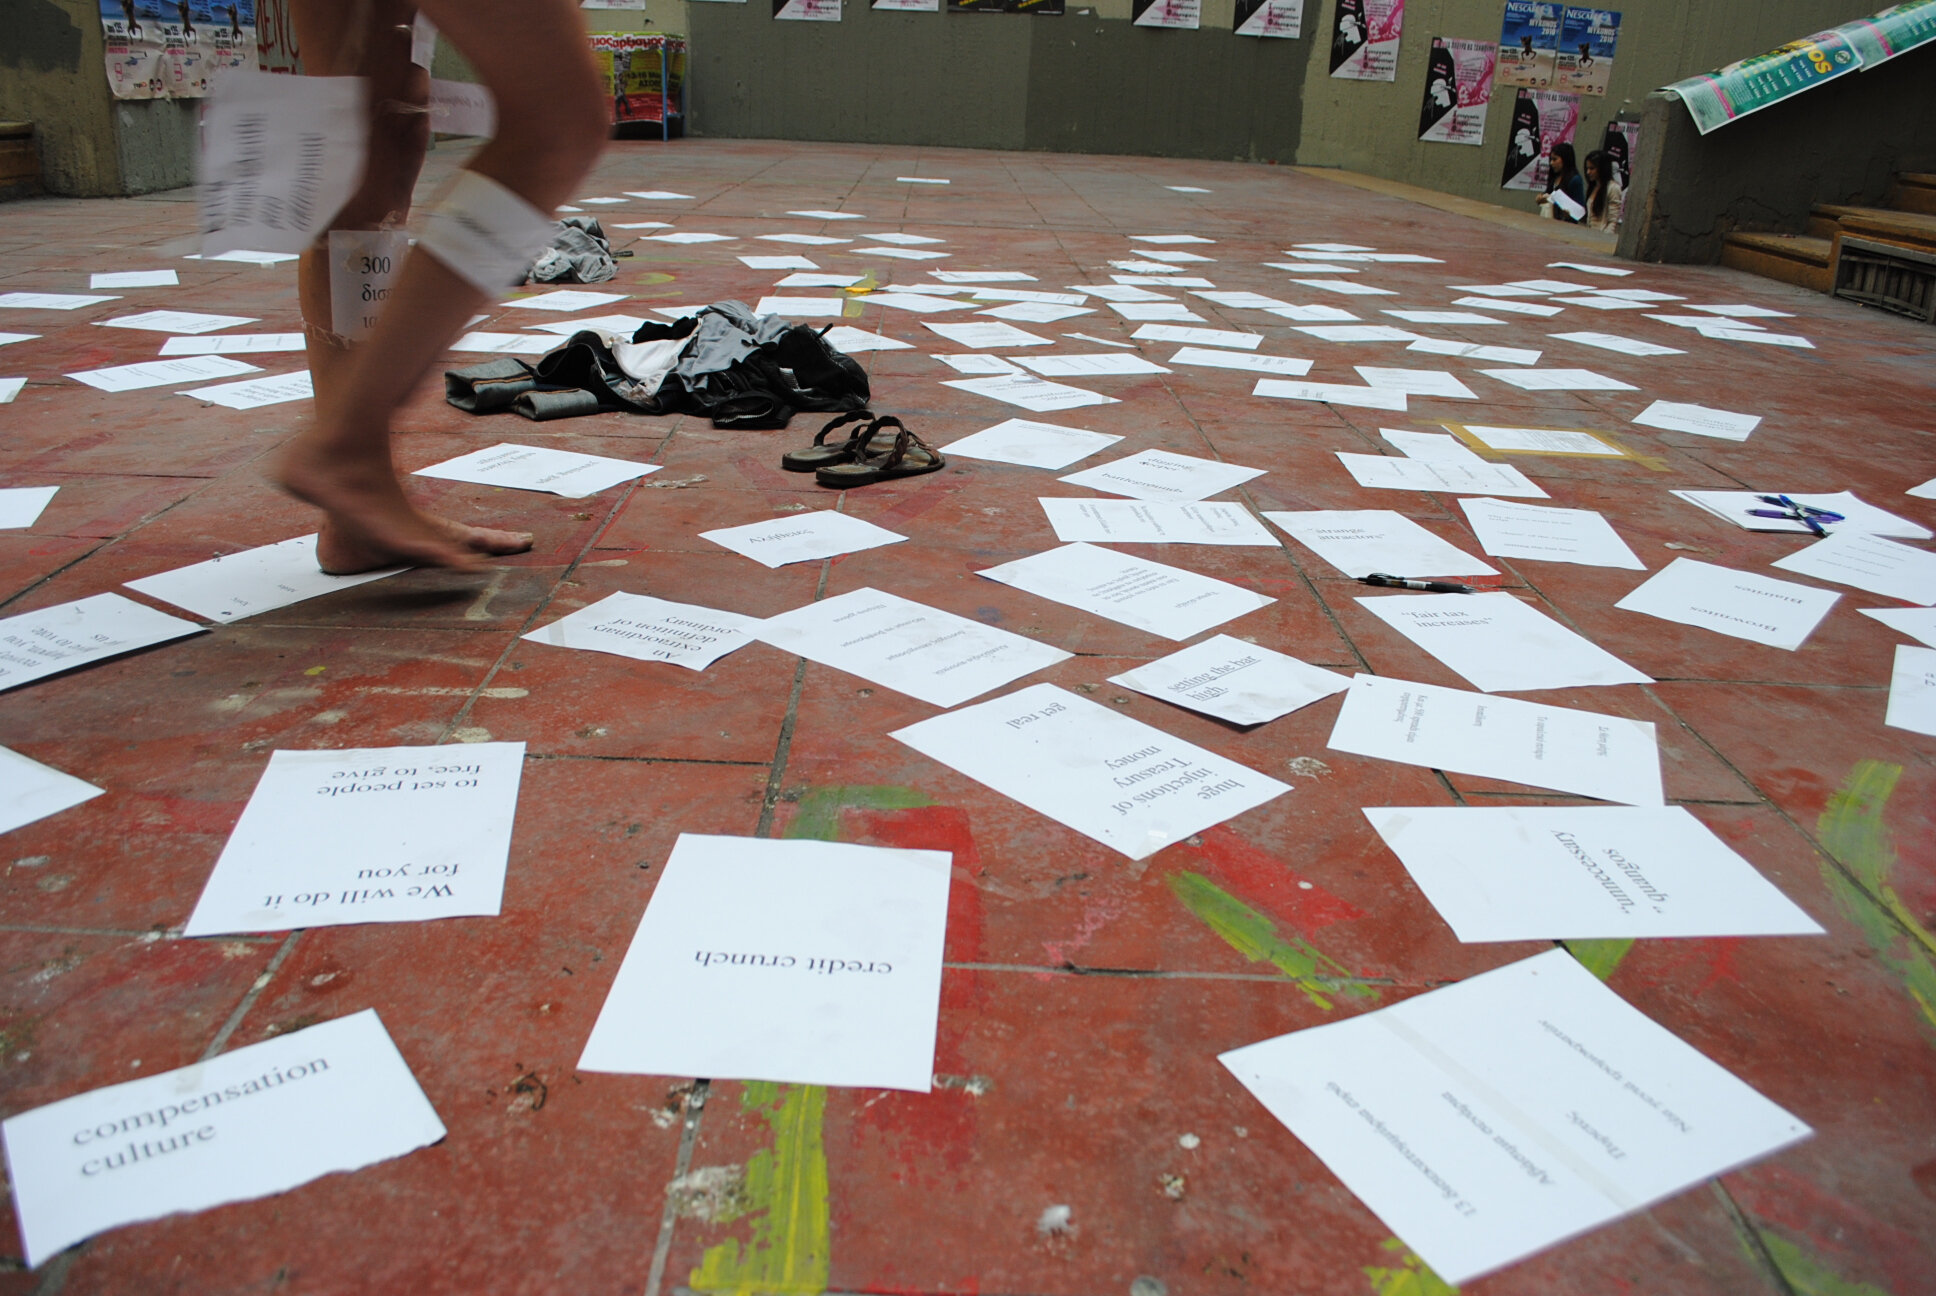 Promote only acts of poetical t_papers on floor.jpg